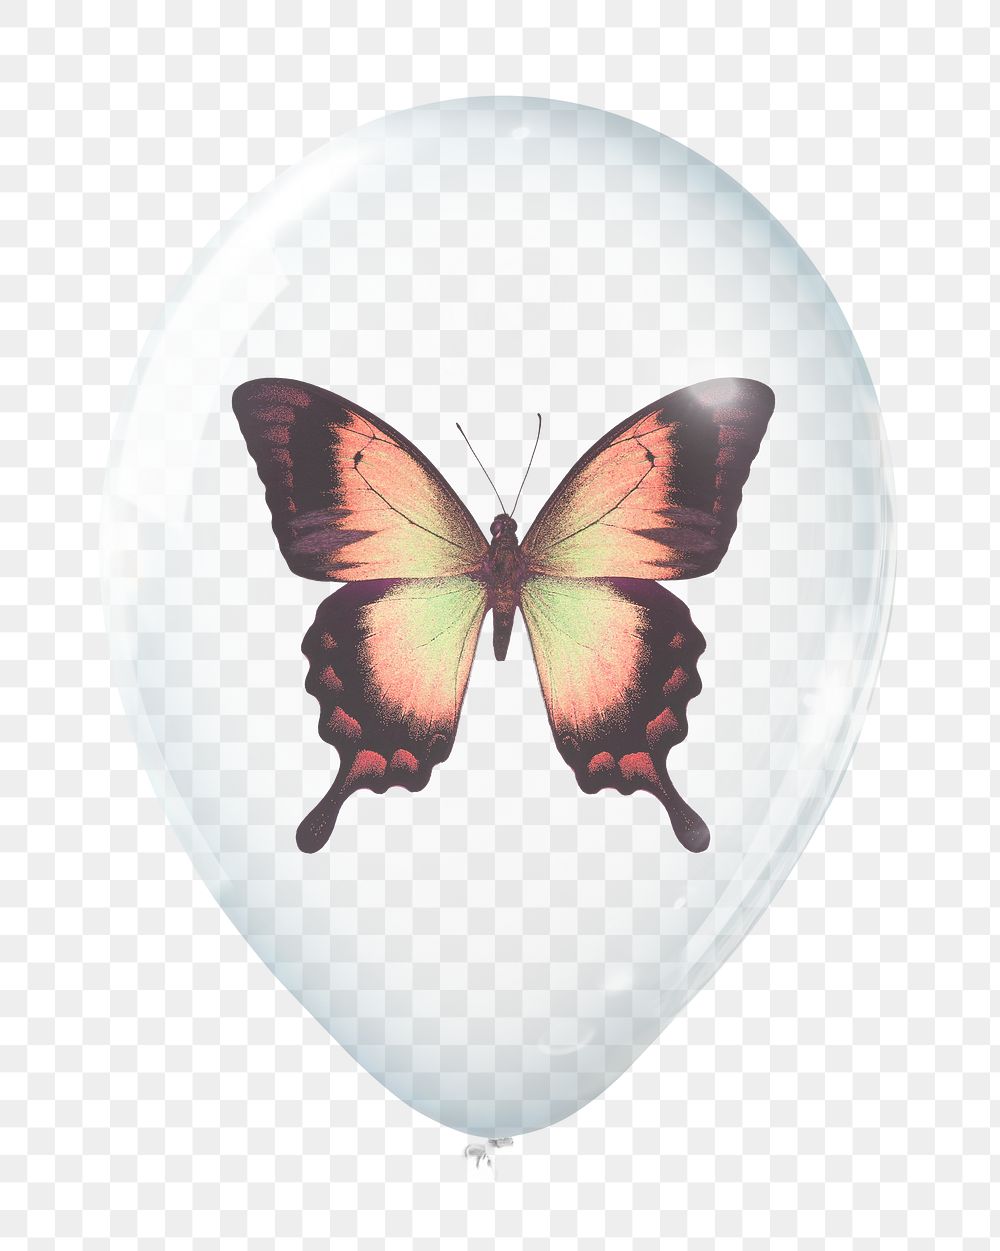 Swallowtail butterfly png sticker, animal in clear balloon, transparent background